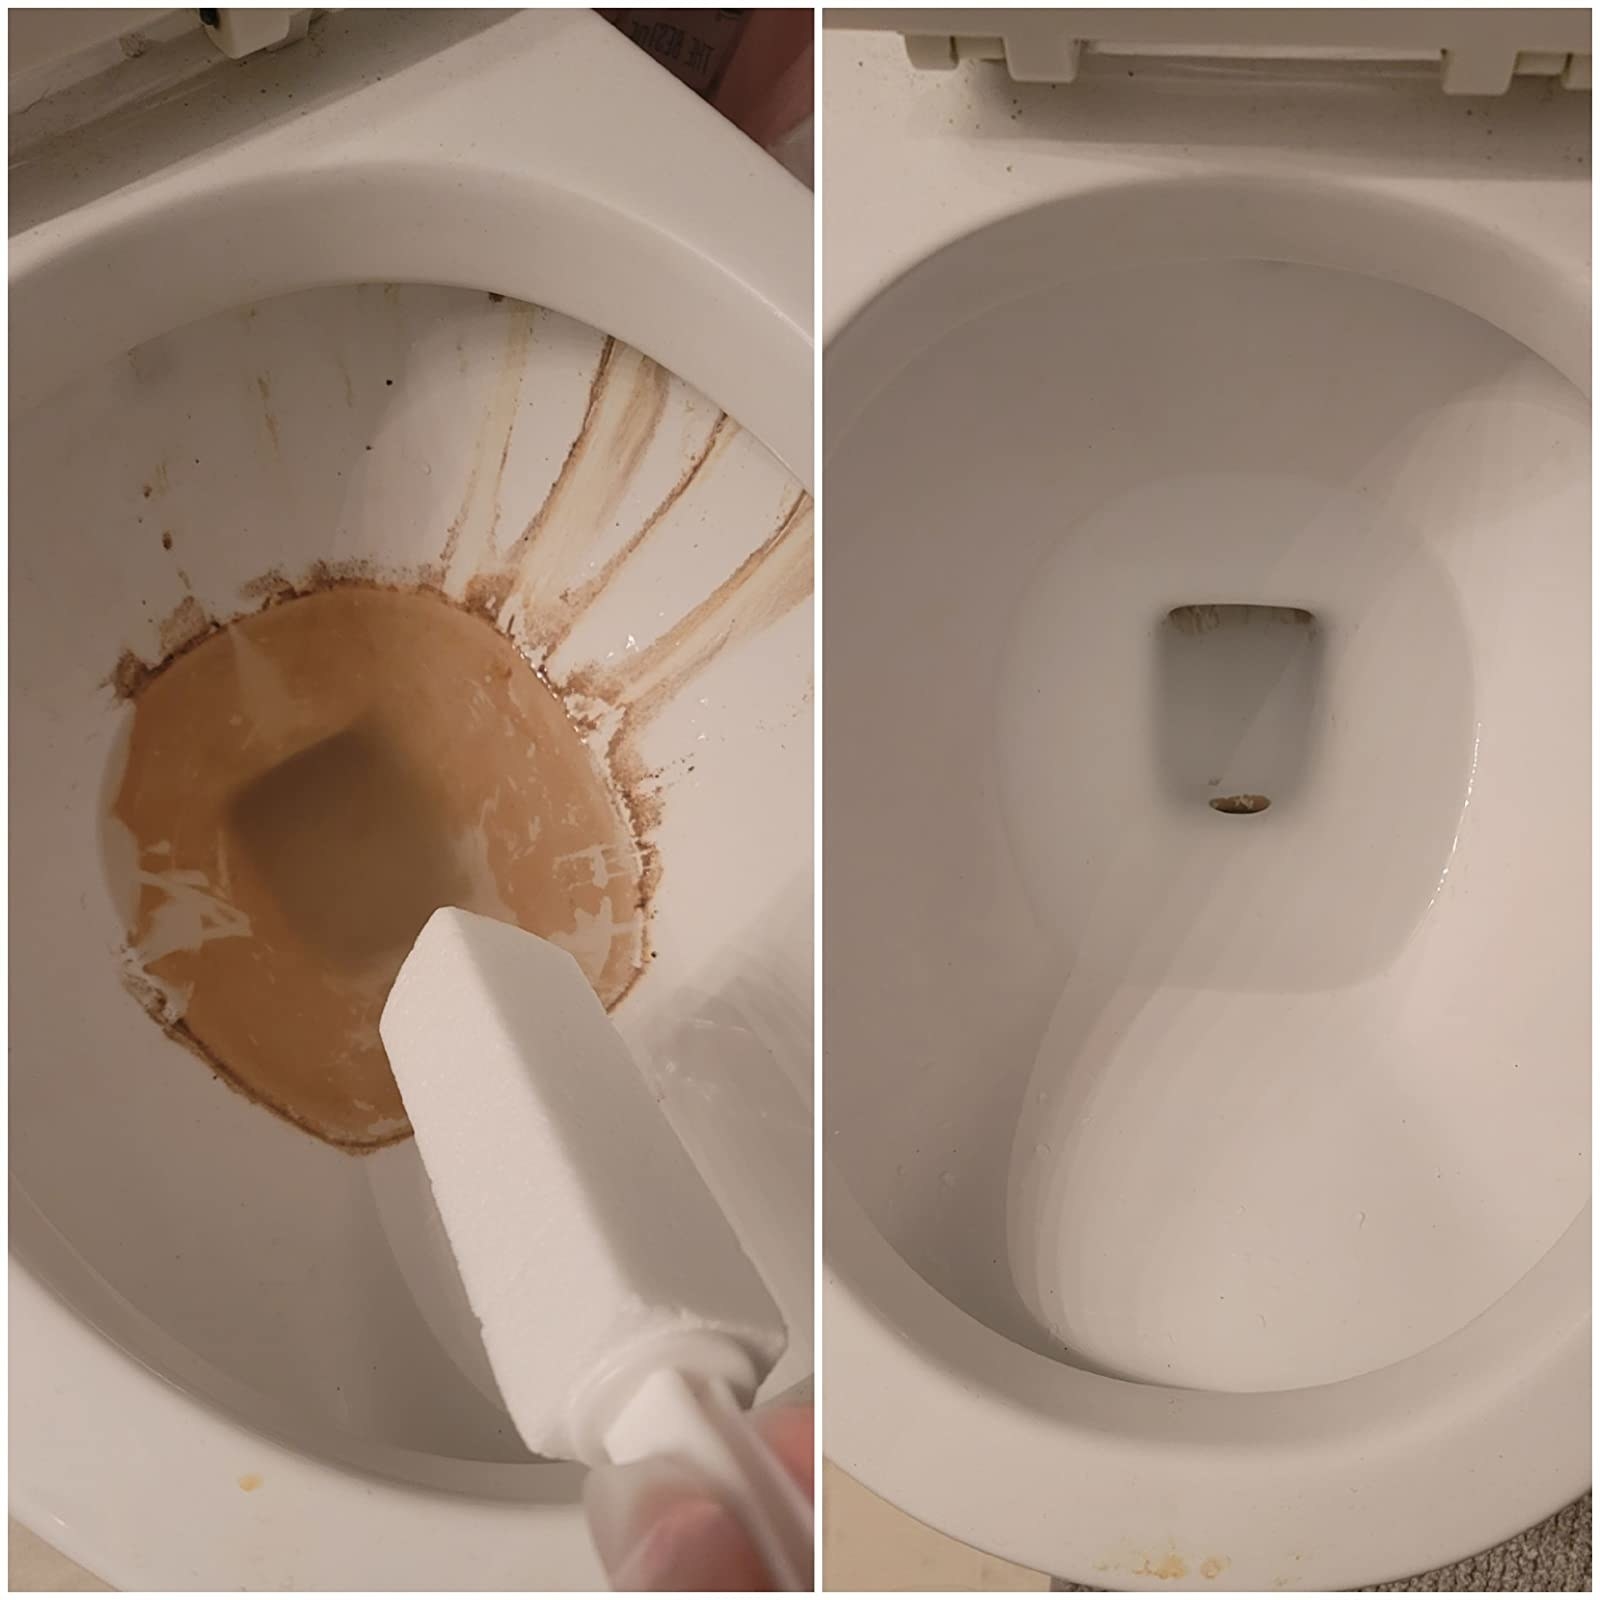 Reviewer&#x27;s before and after photo showing a toilet bowl with stains and a sparkling toilet bowl after it was cleaned